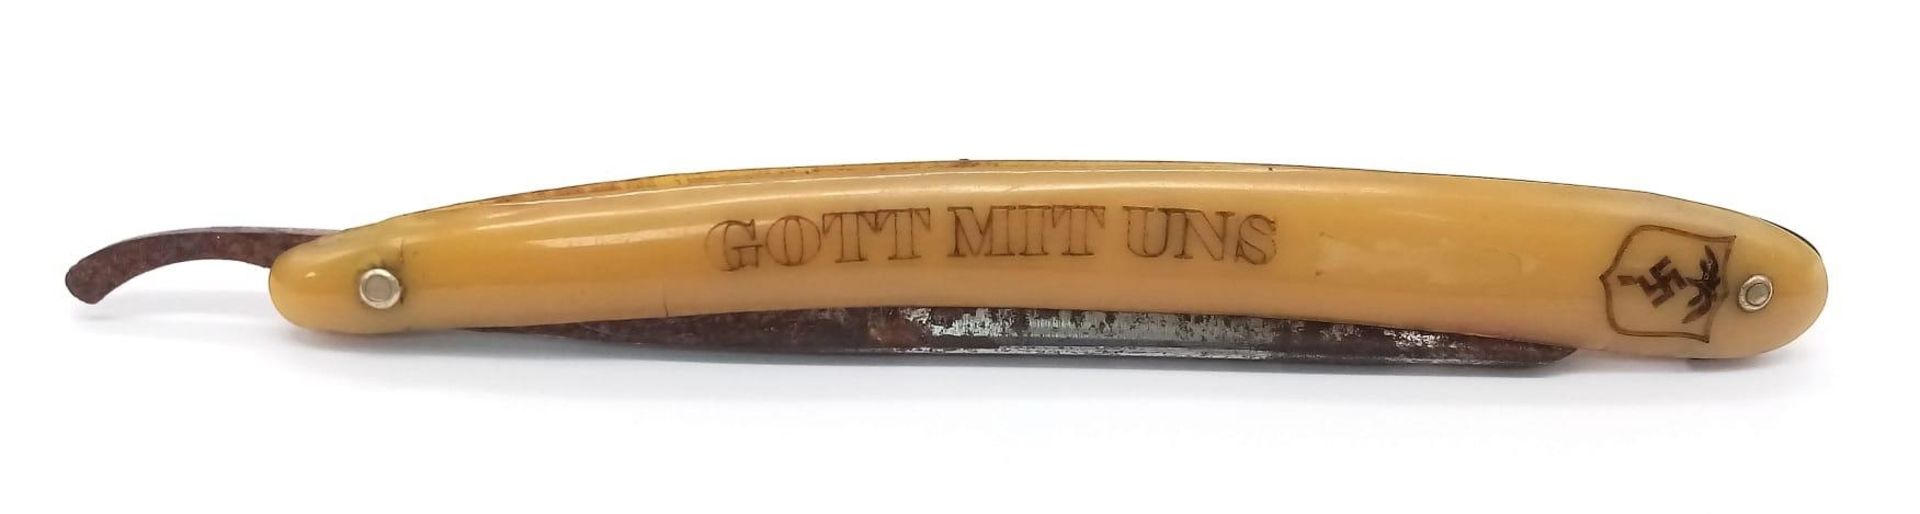 WW2 German Africa Corps Patriotic Cut-throat Razor. There is a small chip in the blade.